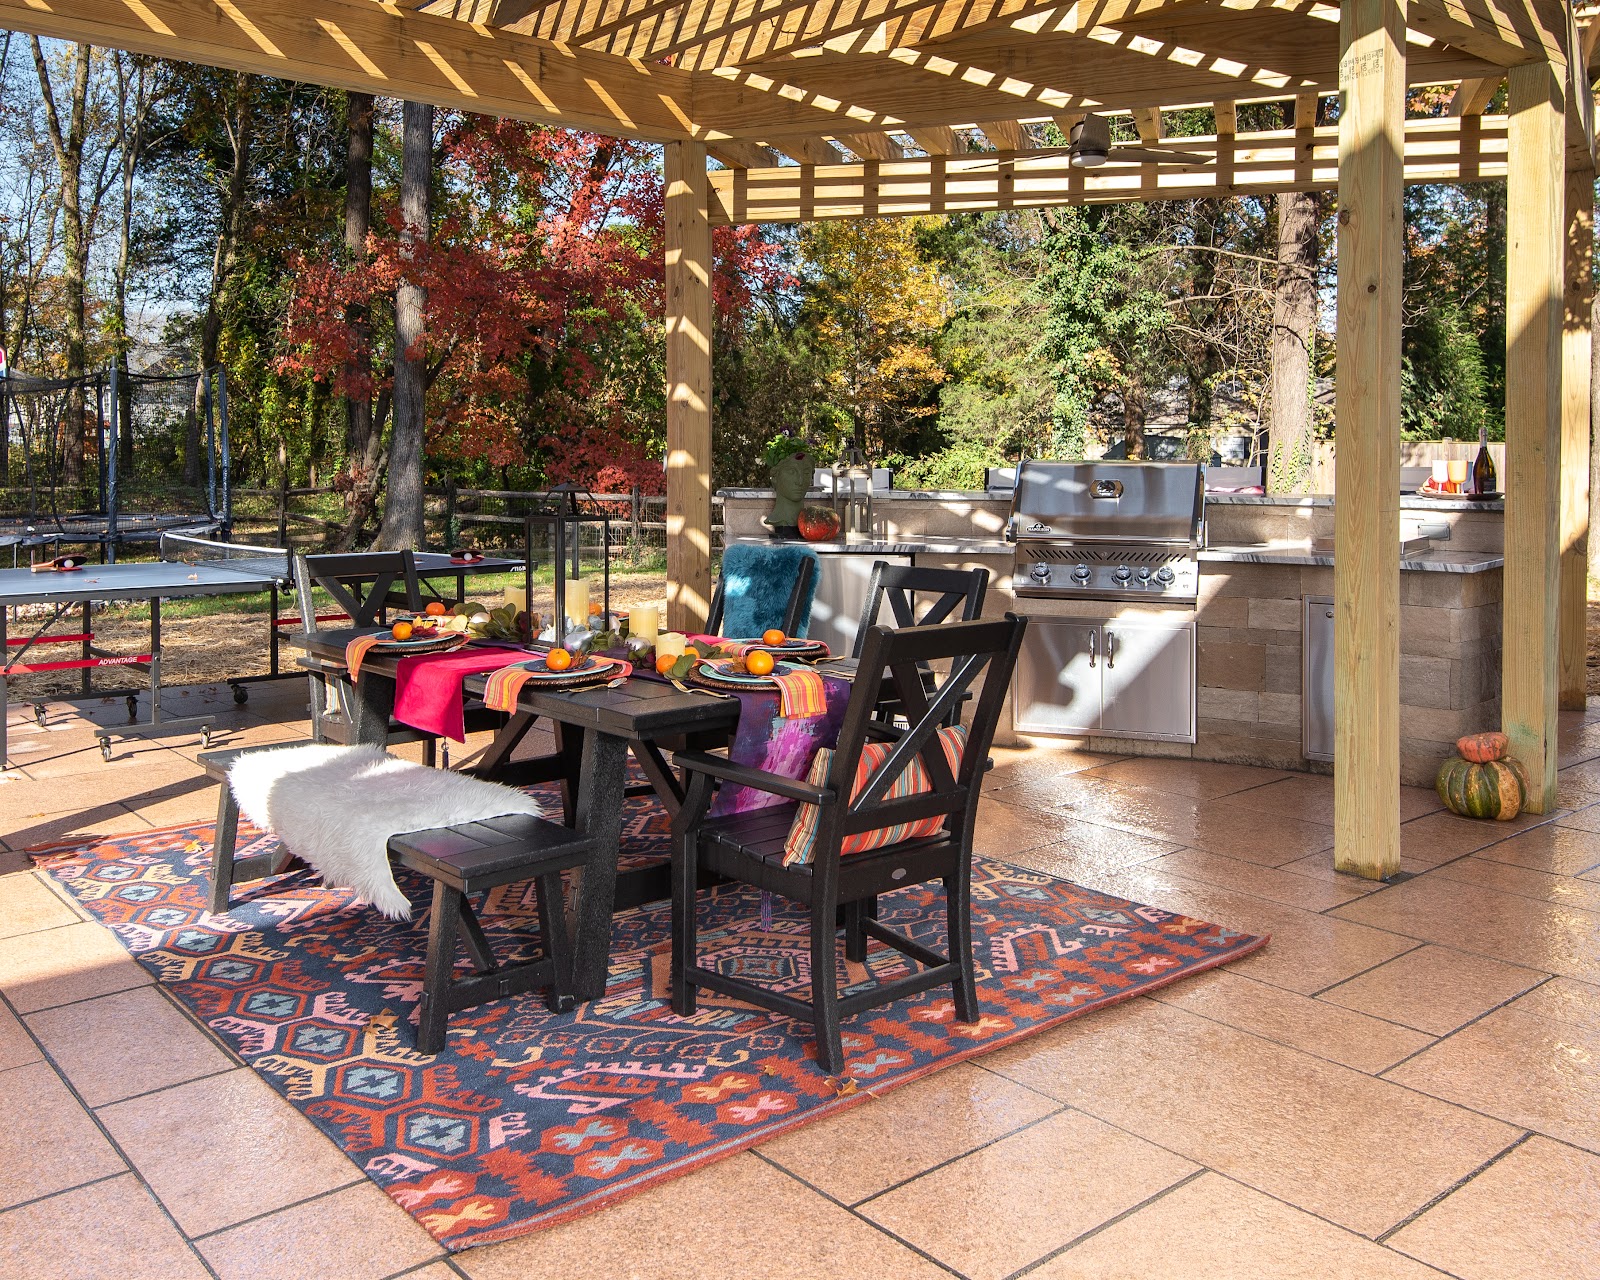 Another image of Polycor stone highlighted in this outdoor living space